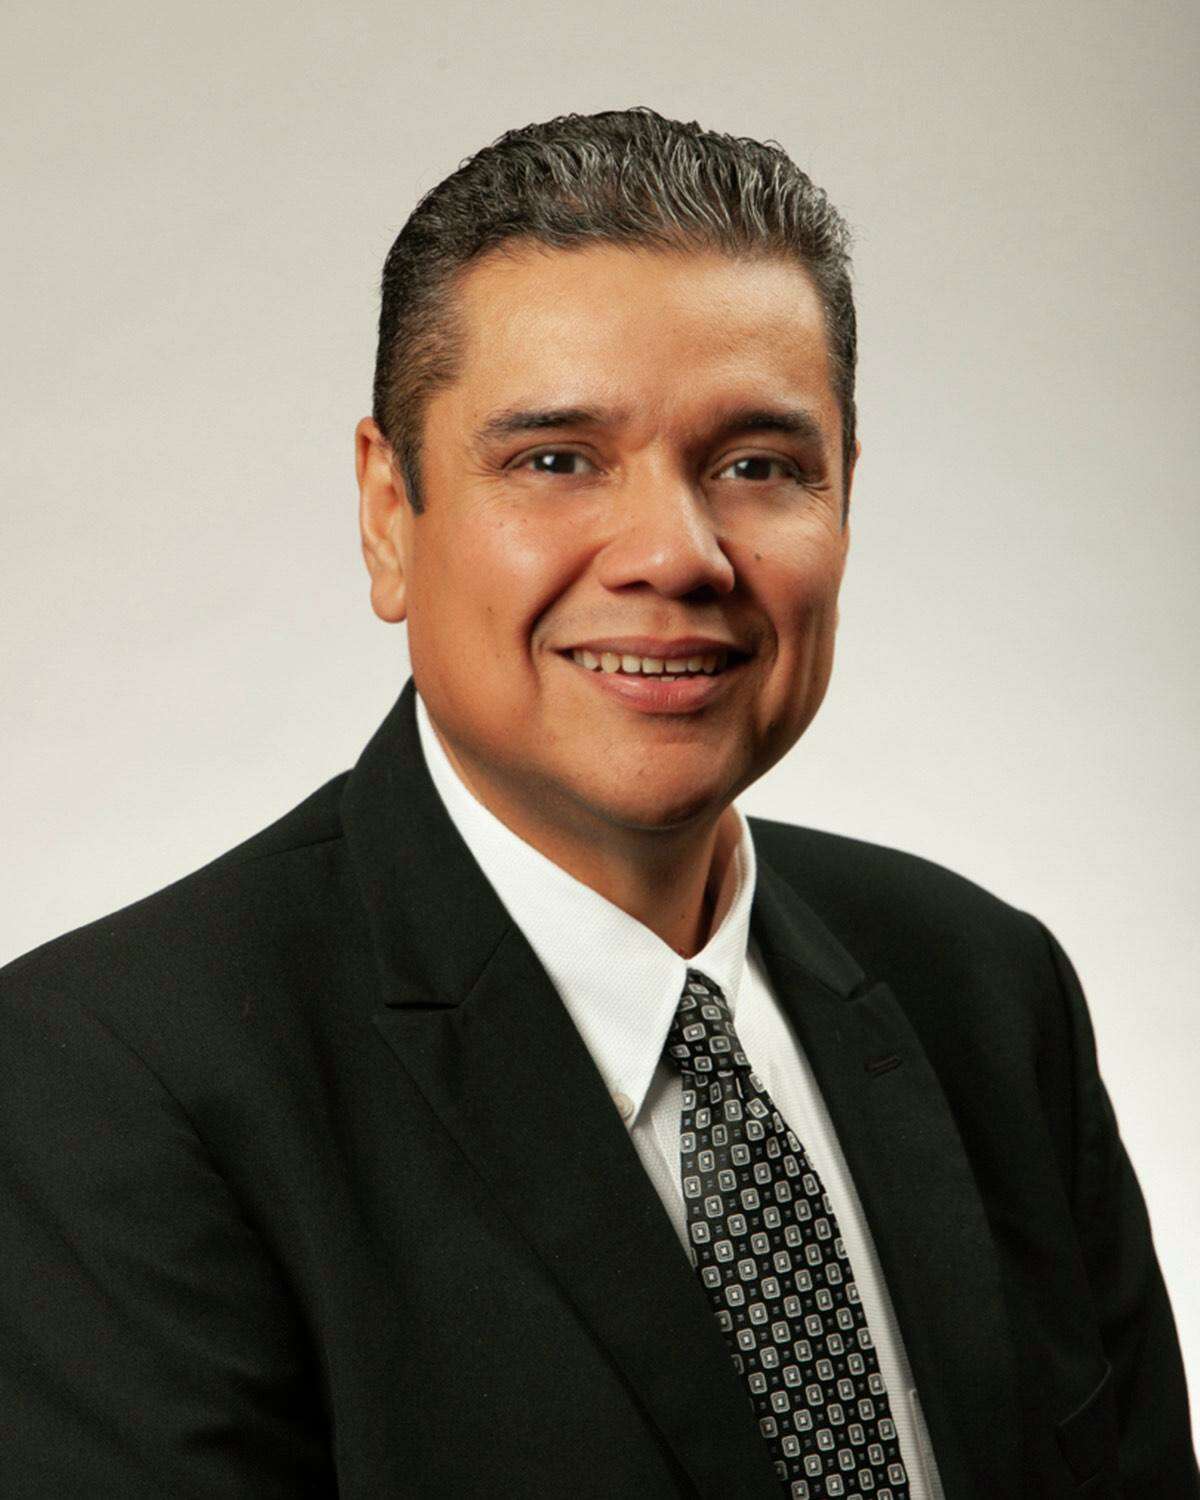 Jesus “Jesse” Hernandez, 45, will make the transition from an appointed manager at Southside ISD to an elected trustee.